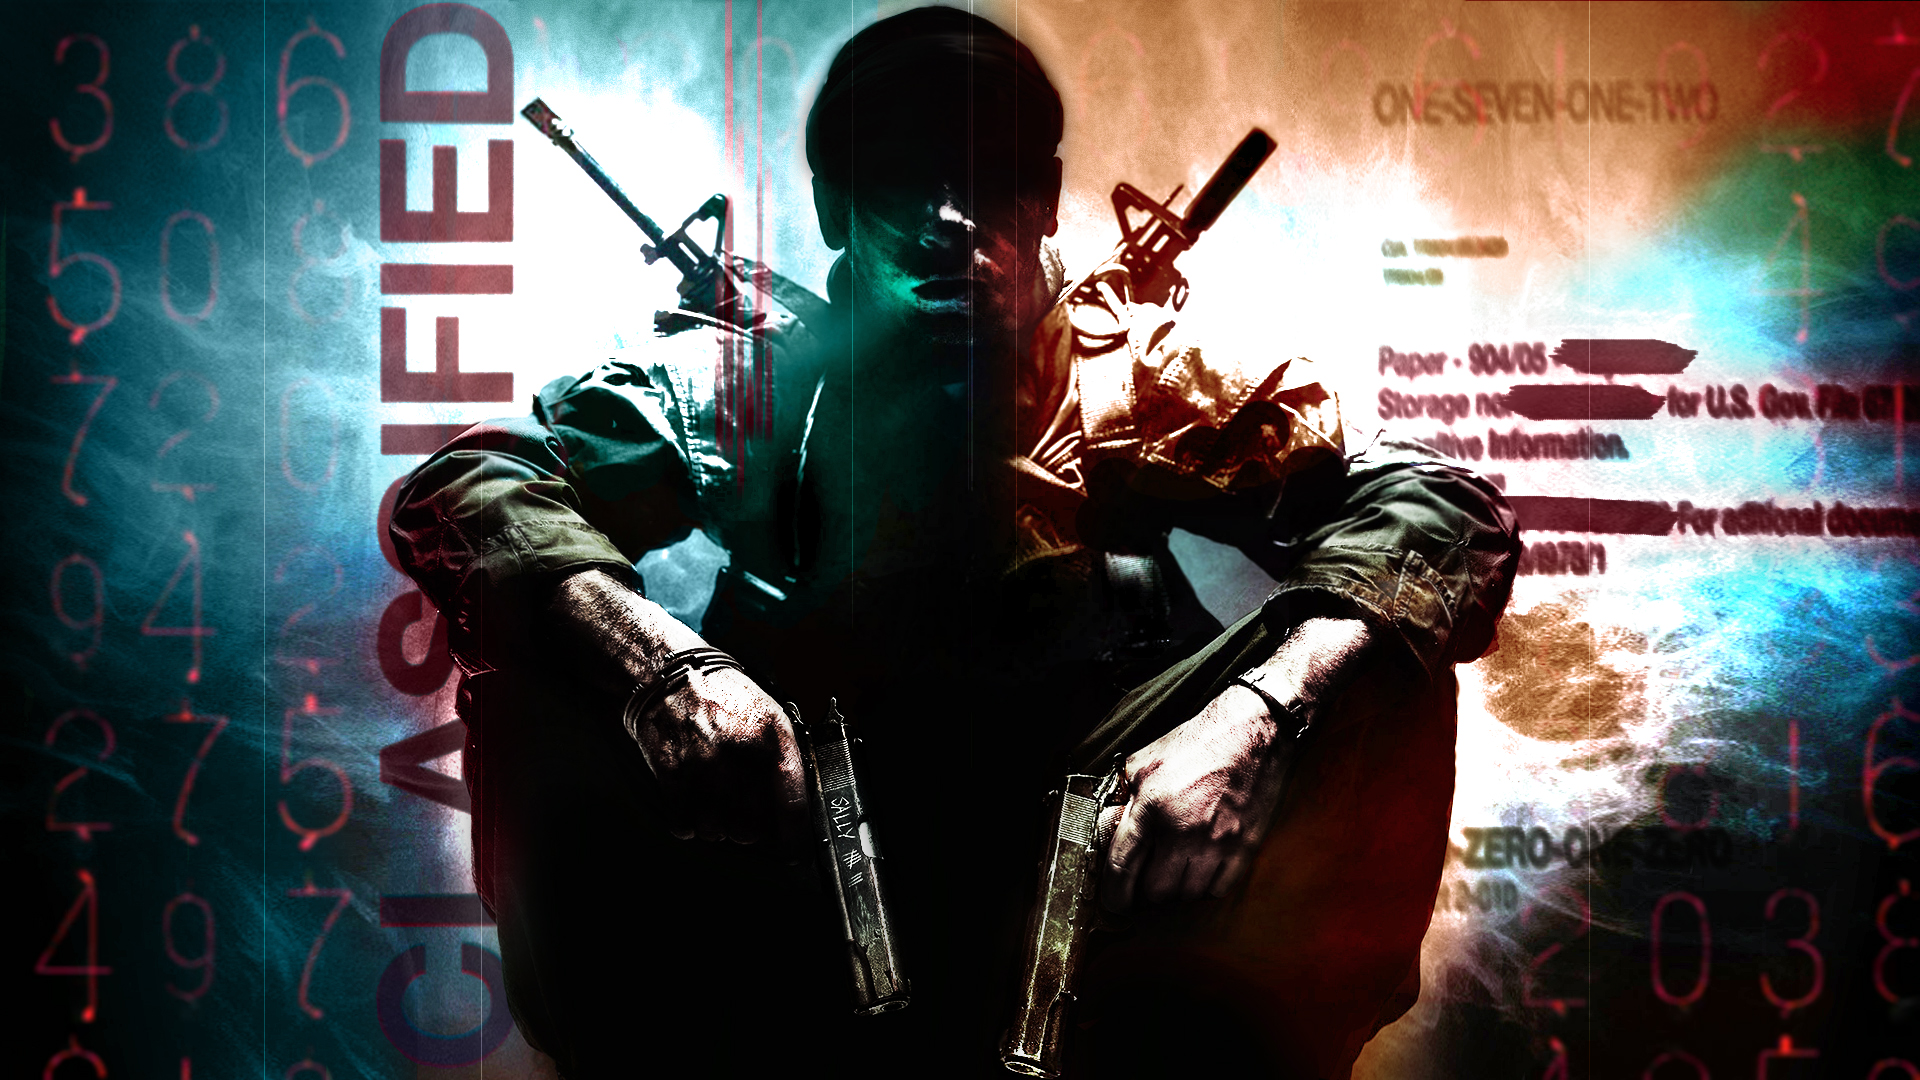 Call Of Duty Black Ops Background